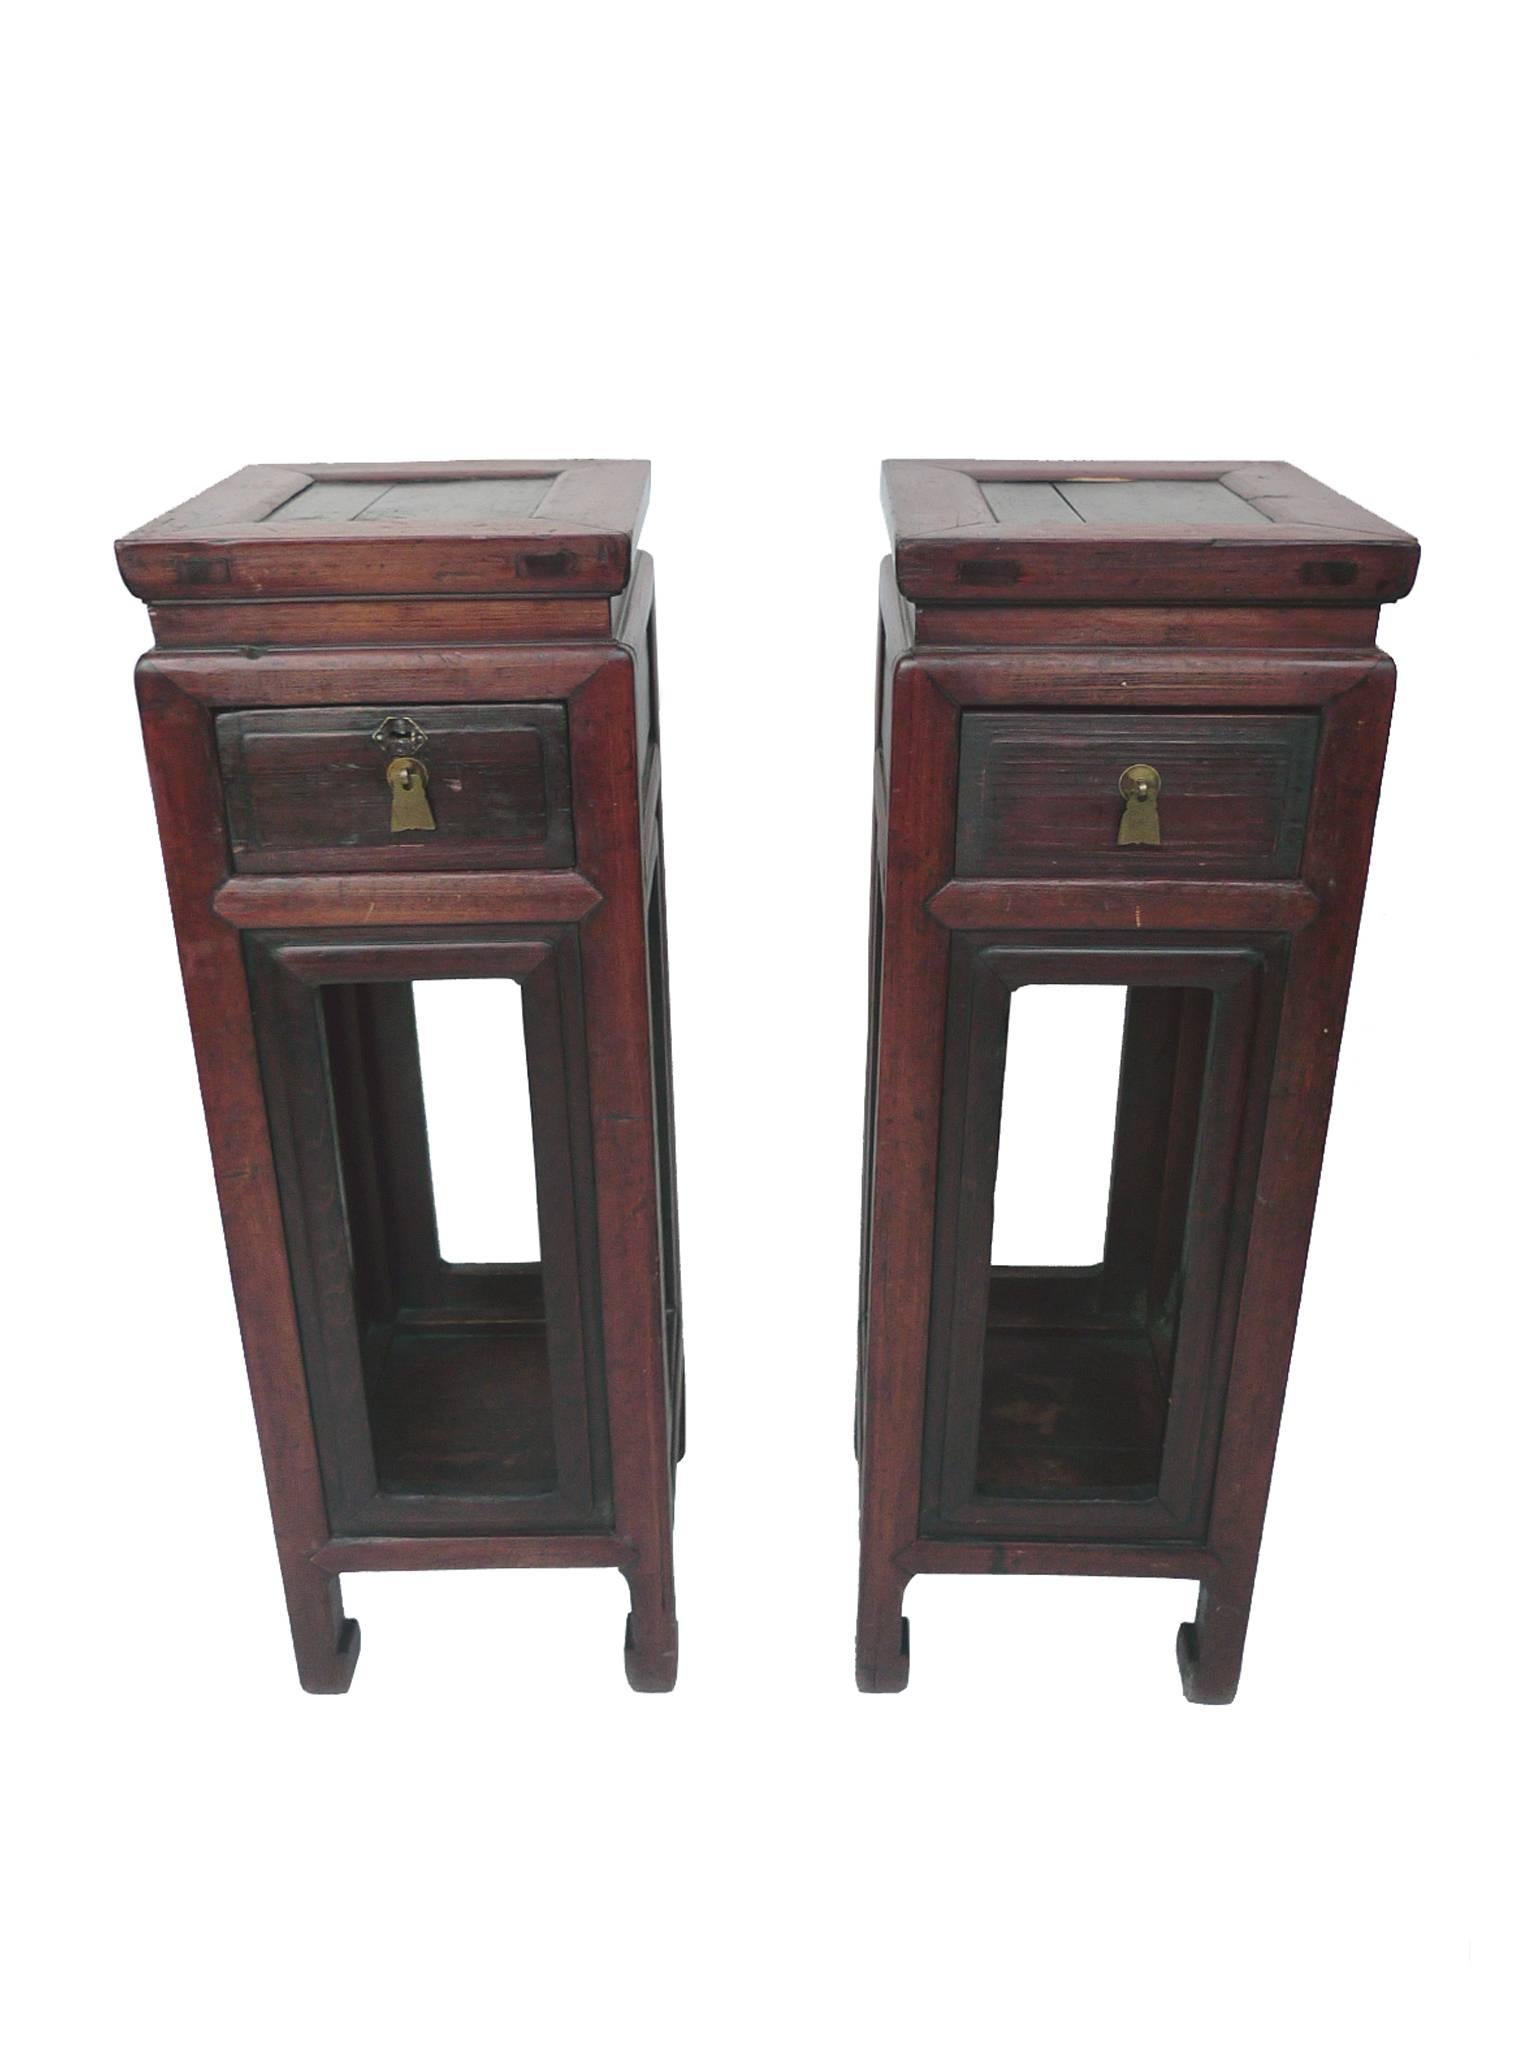 These 19th century, Asian pedestal stands are elmwood with a burgundy-red finish. The wood has aged beautifully, with soft edges and corners. Each pedestal stand has a single drawer with a brass pull and a shelf below.